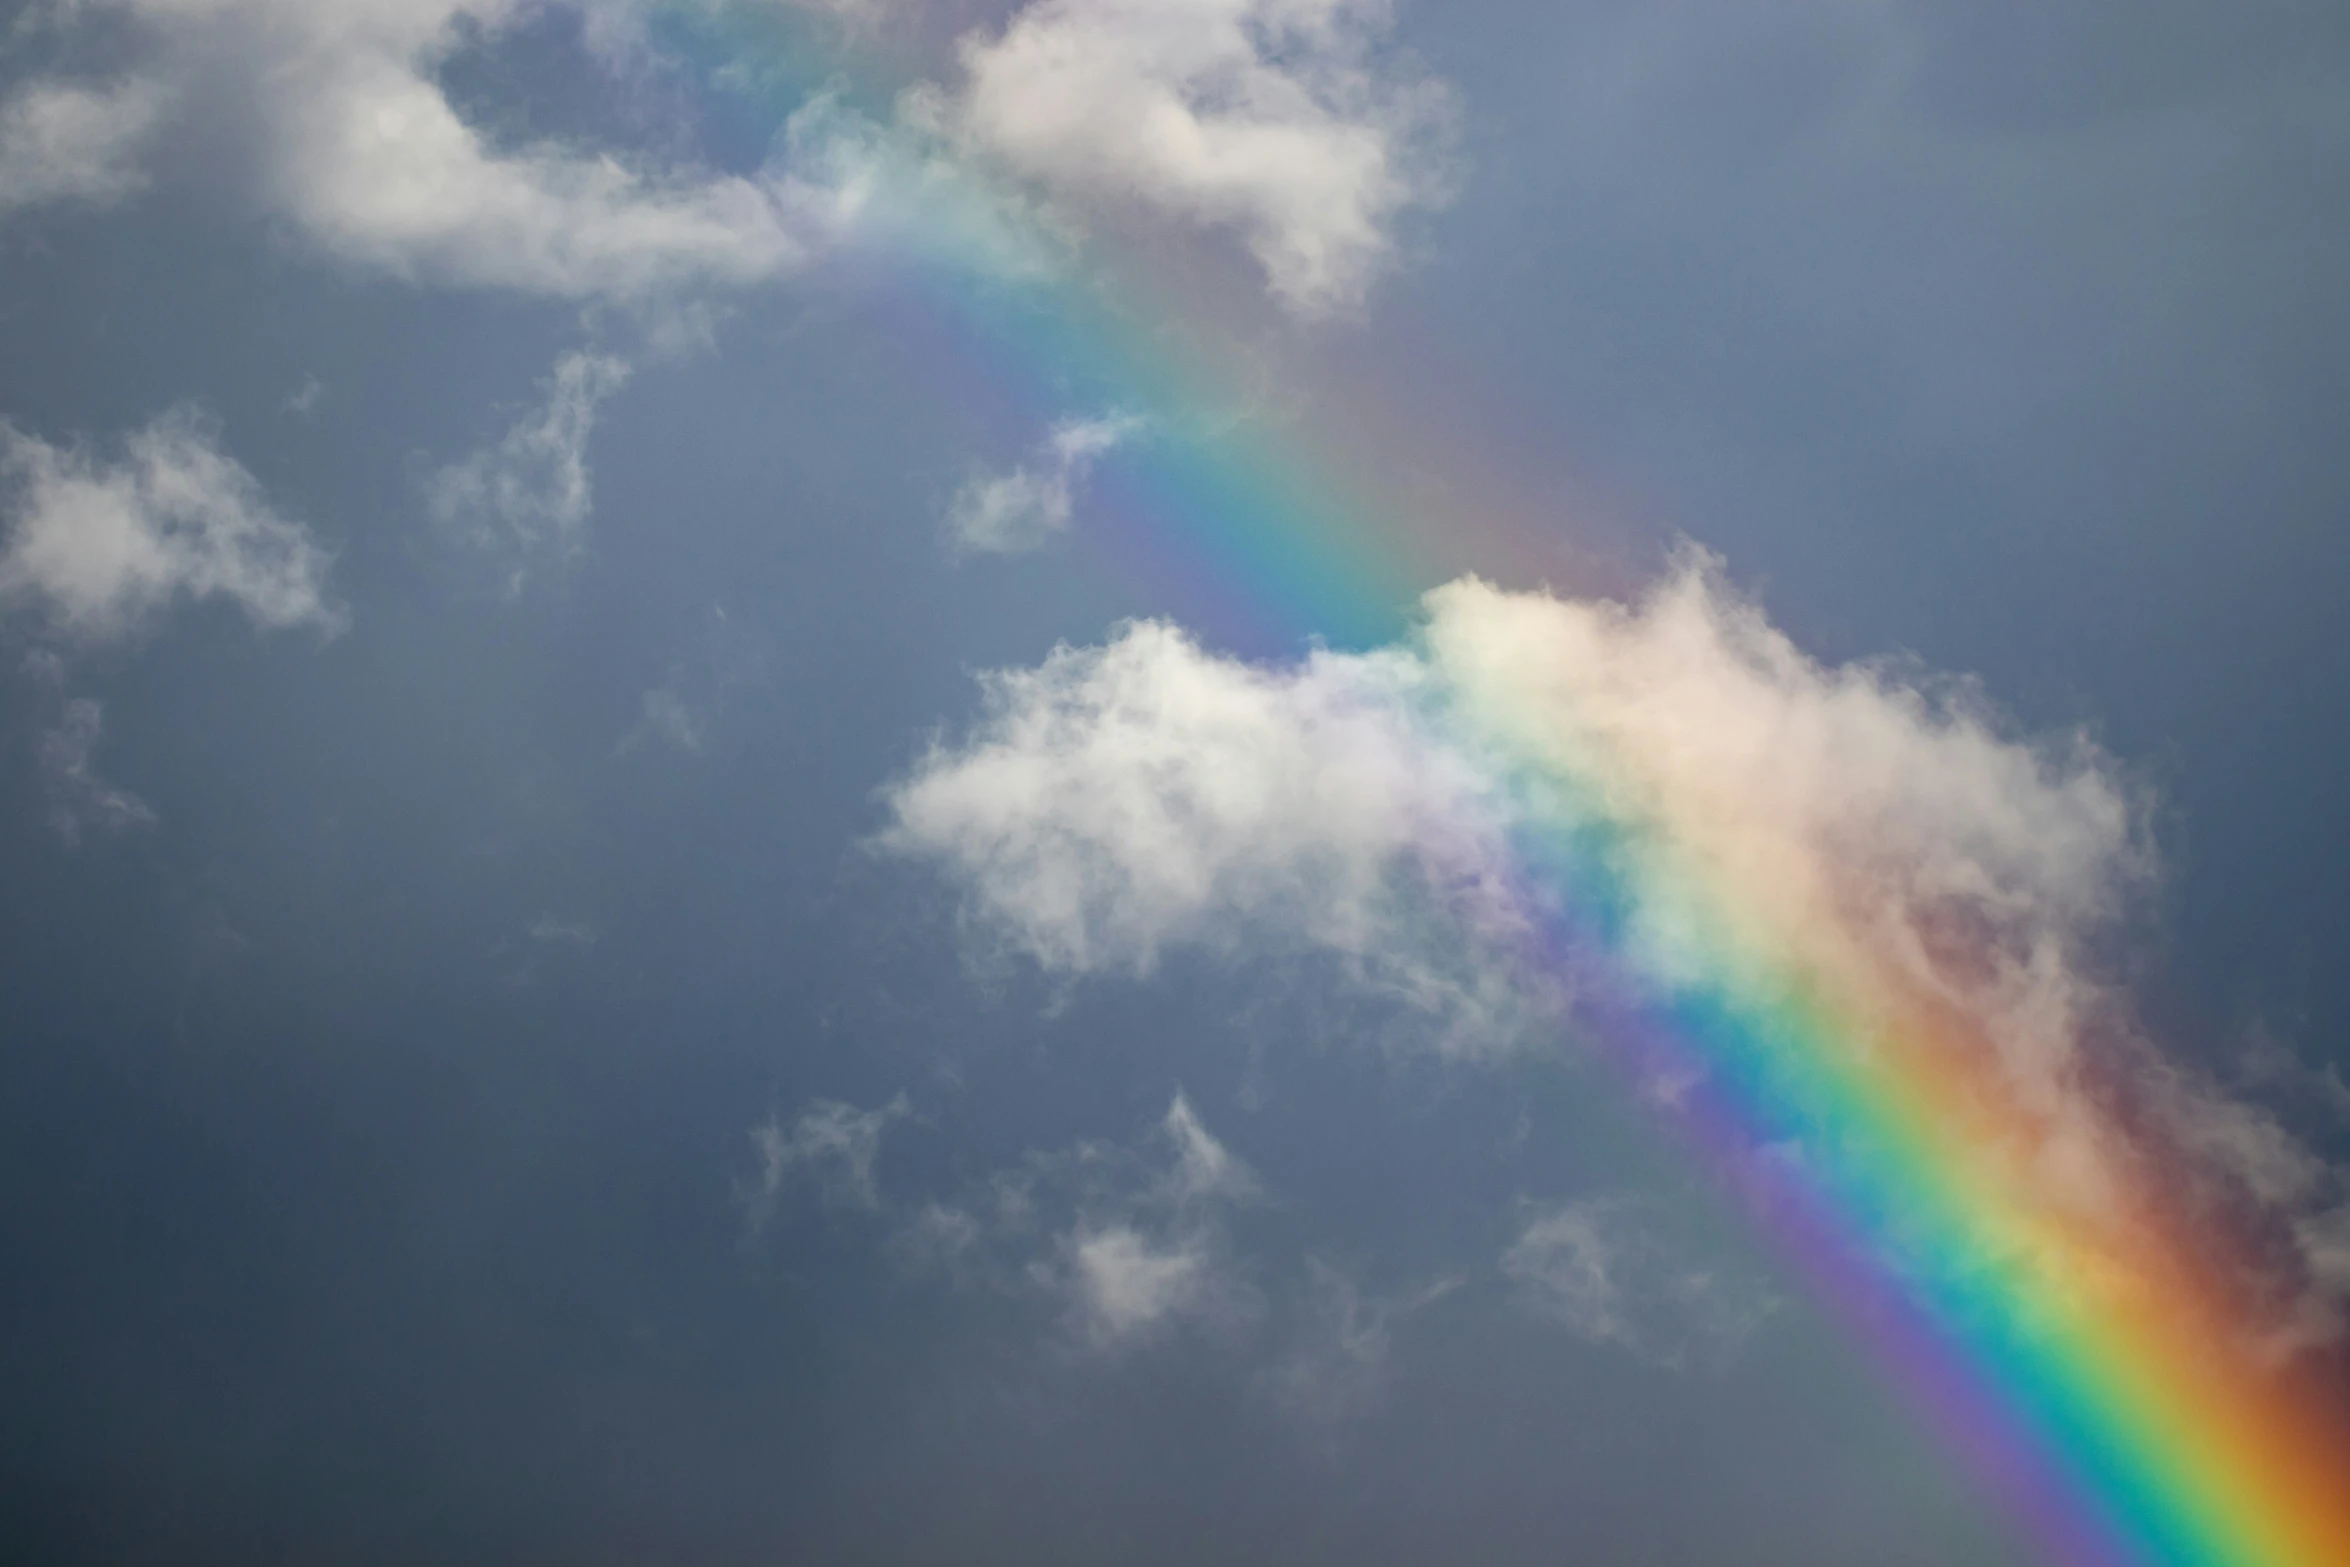 a rainbow appears brightly in the cloudy sky